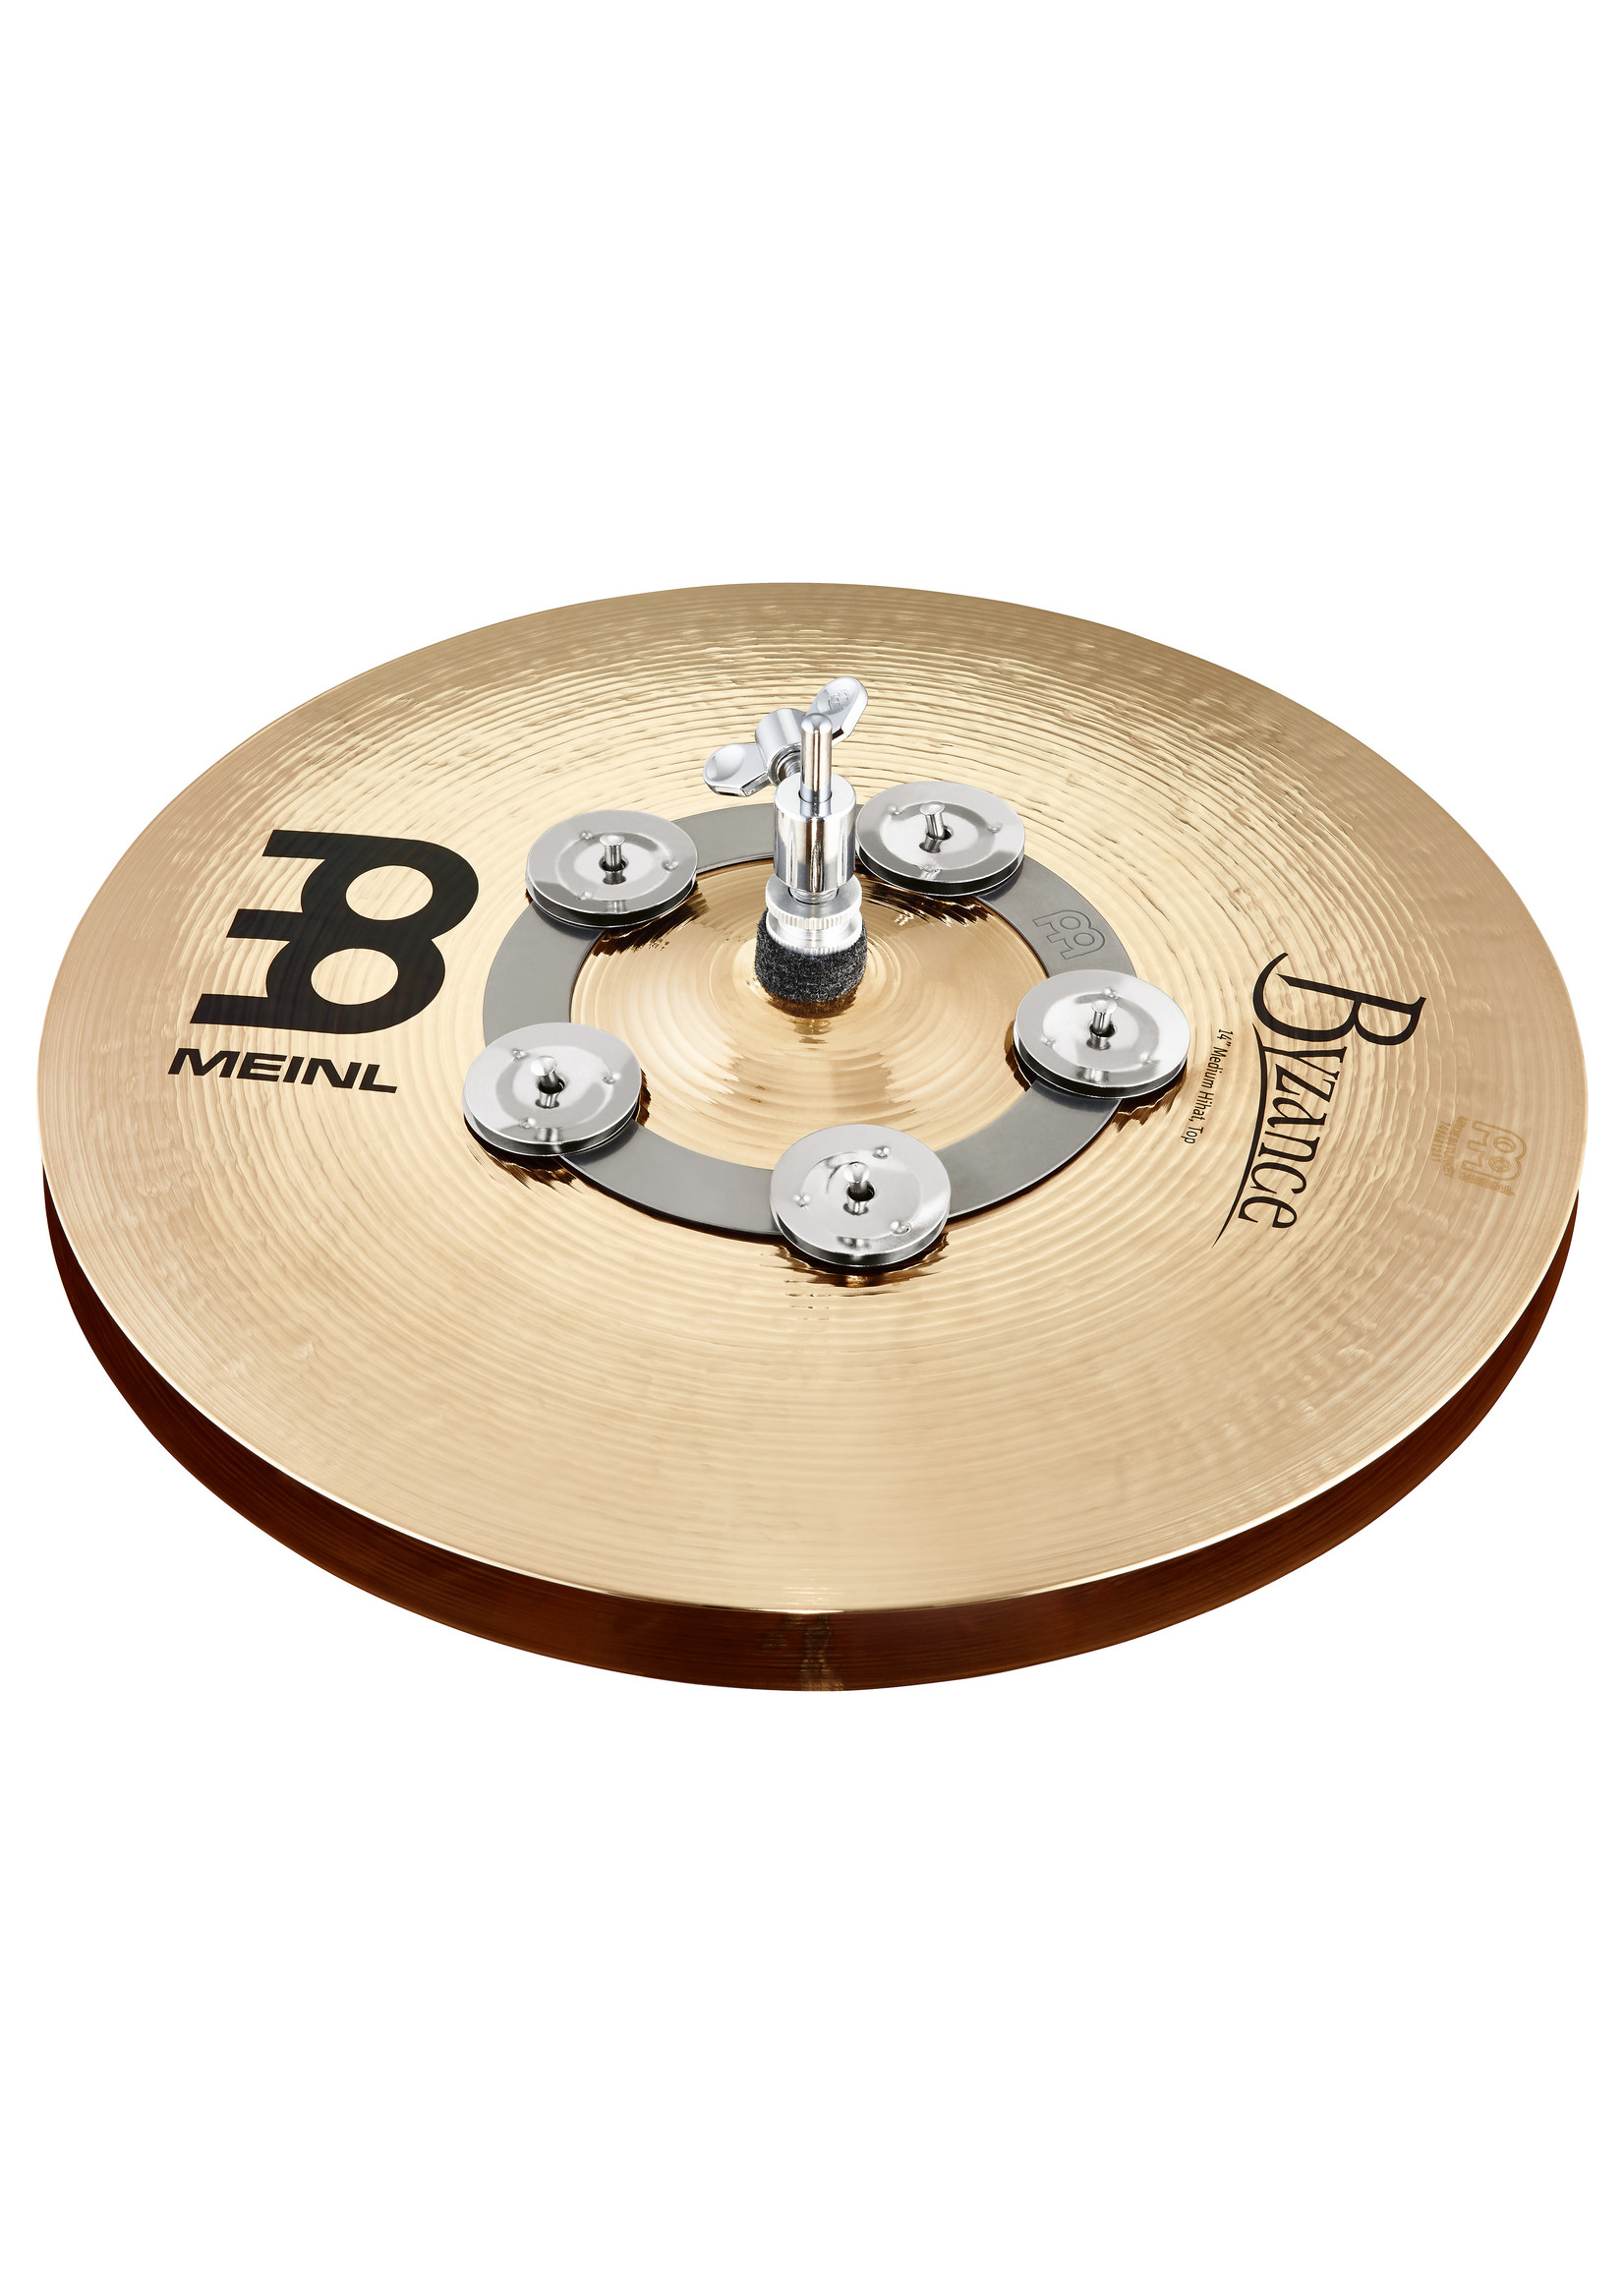 MEINL Meinl Percussion Ching Ring - 6" 6" Hi-hat and Cymbal Effect Tambourine